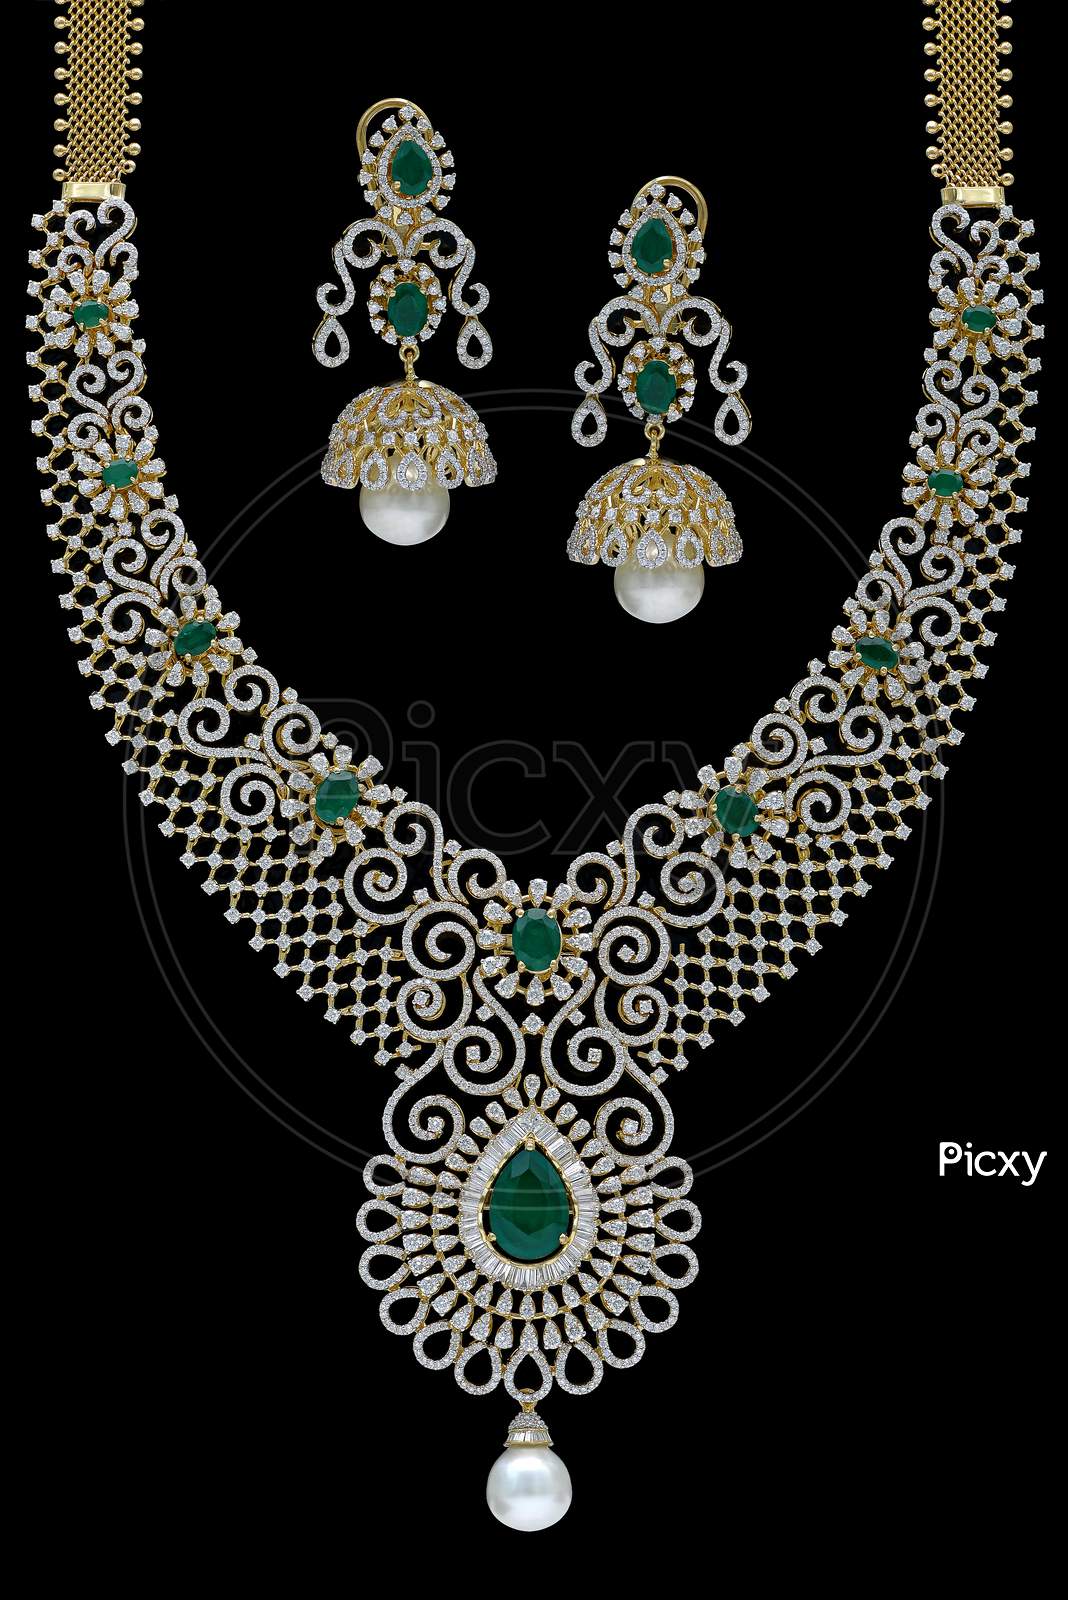 Indian Emerald Jewelry necklace set on a black background